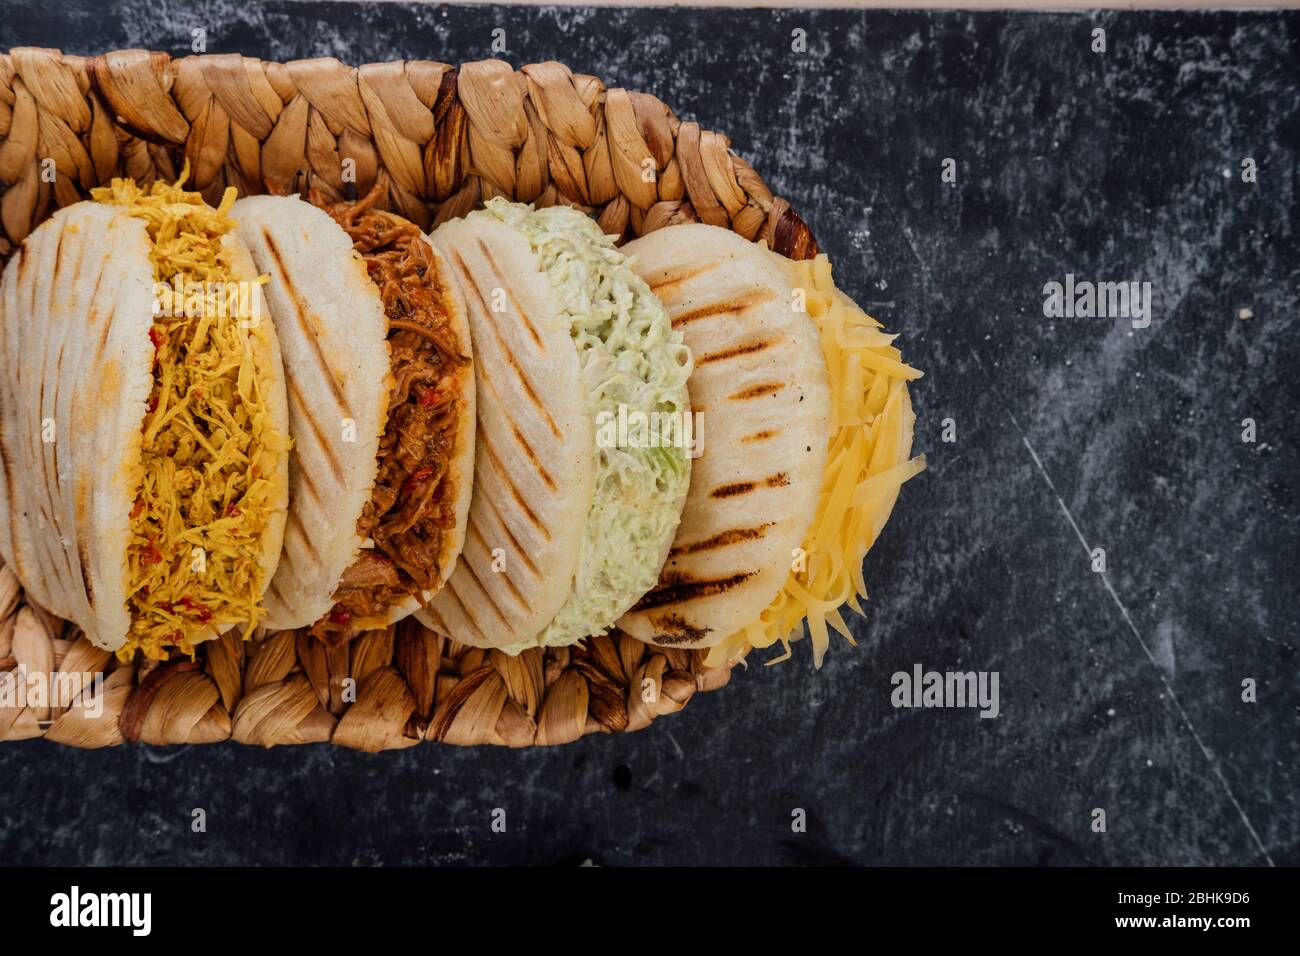 Top view of various types of typical Venezuelan arepas in a woven basket Stock Photo